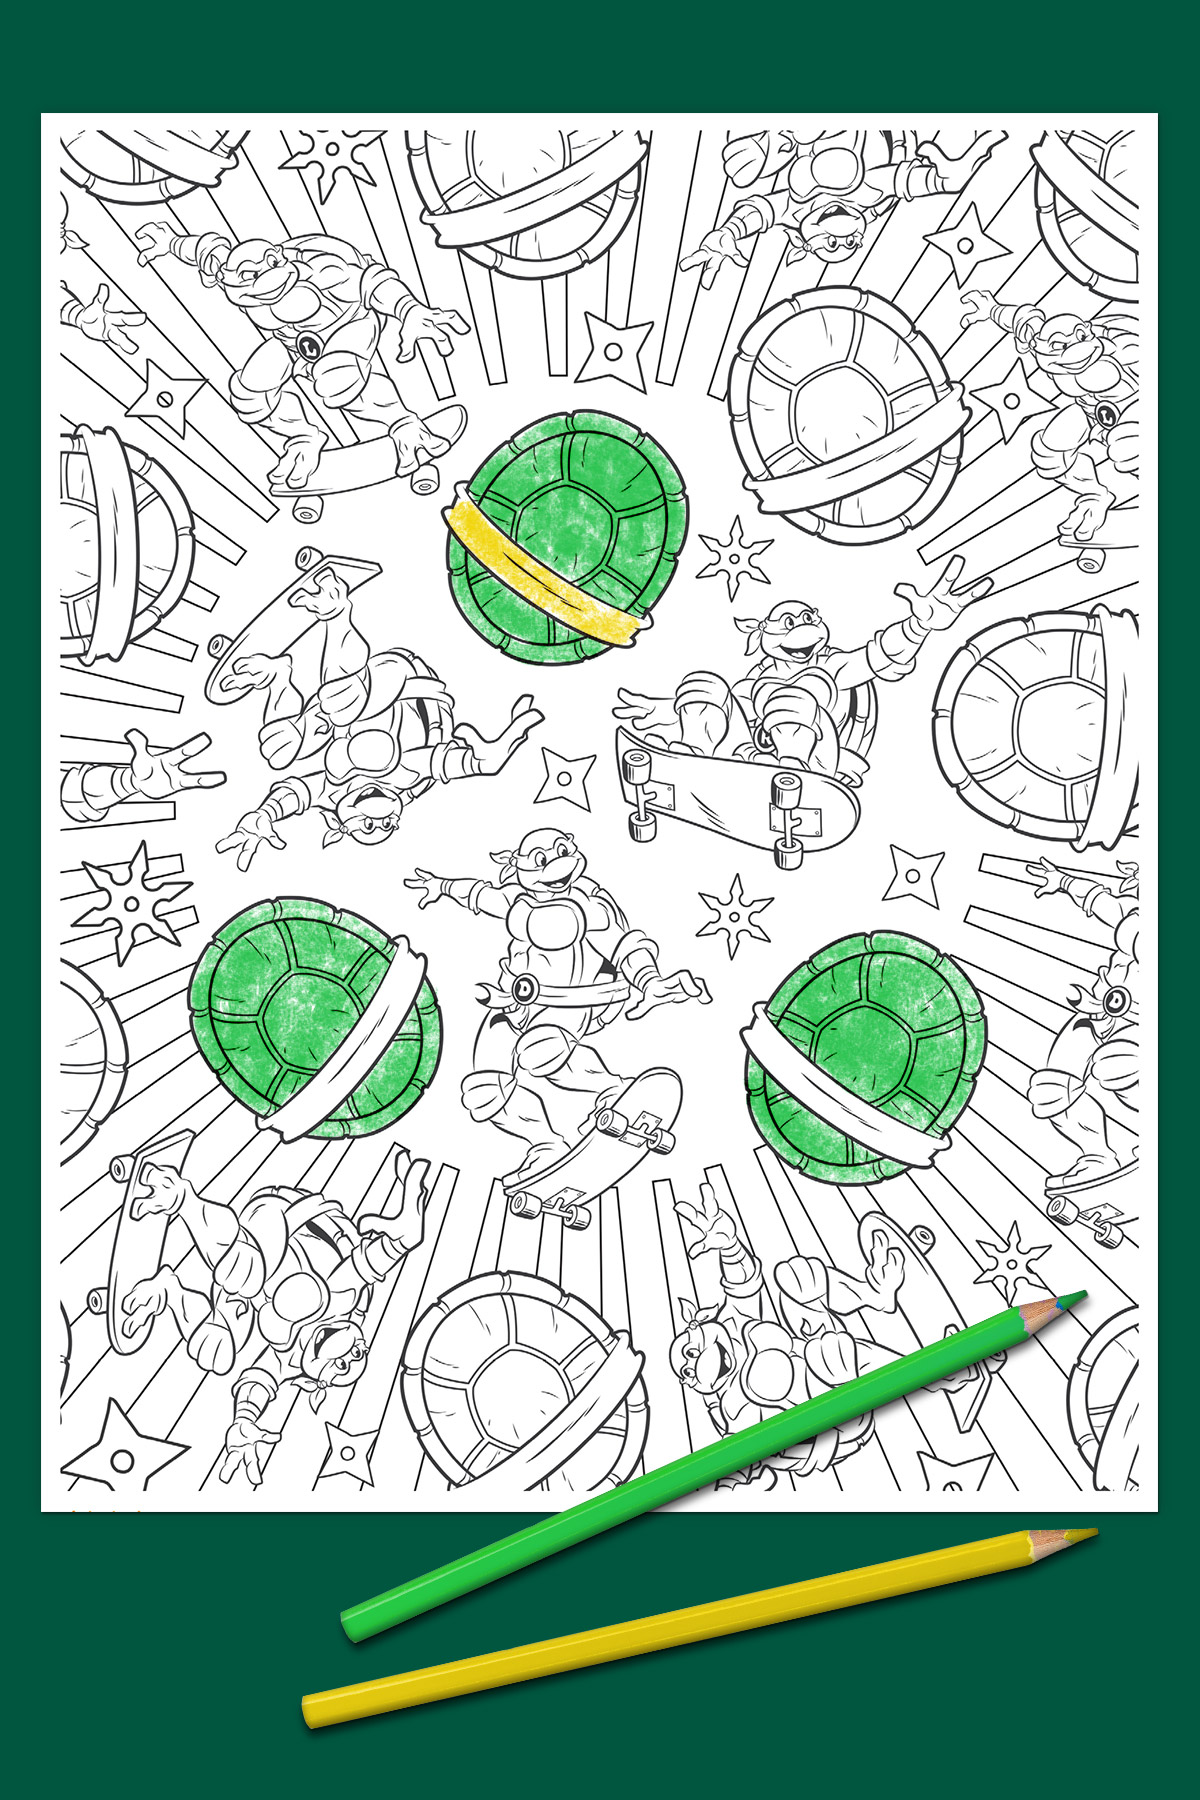 TMNT Adult Coloring Page   Nickelodeon Parents